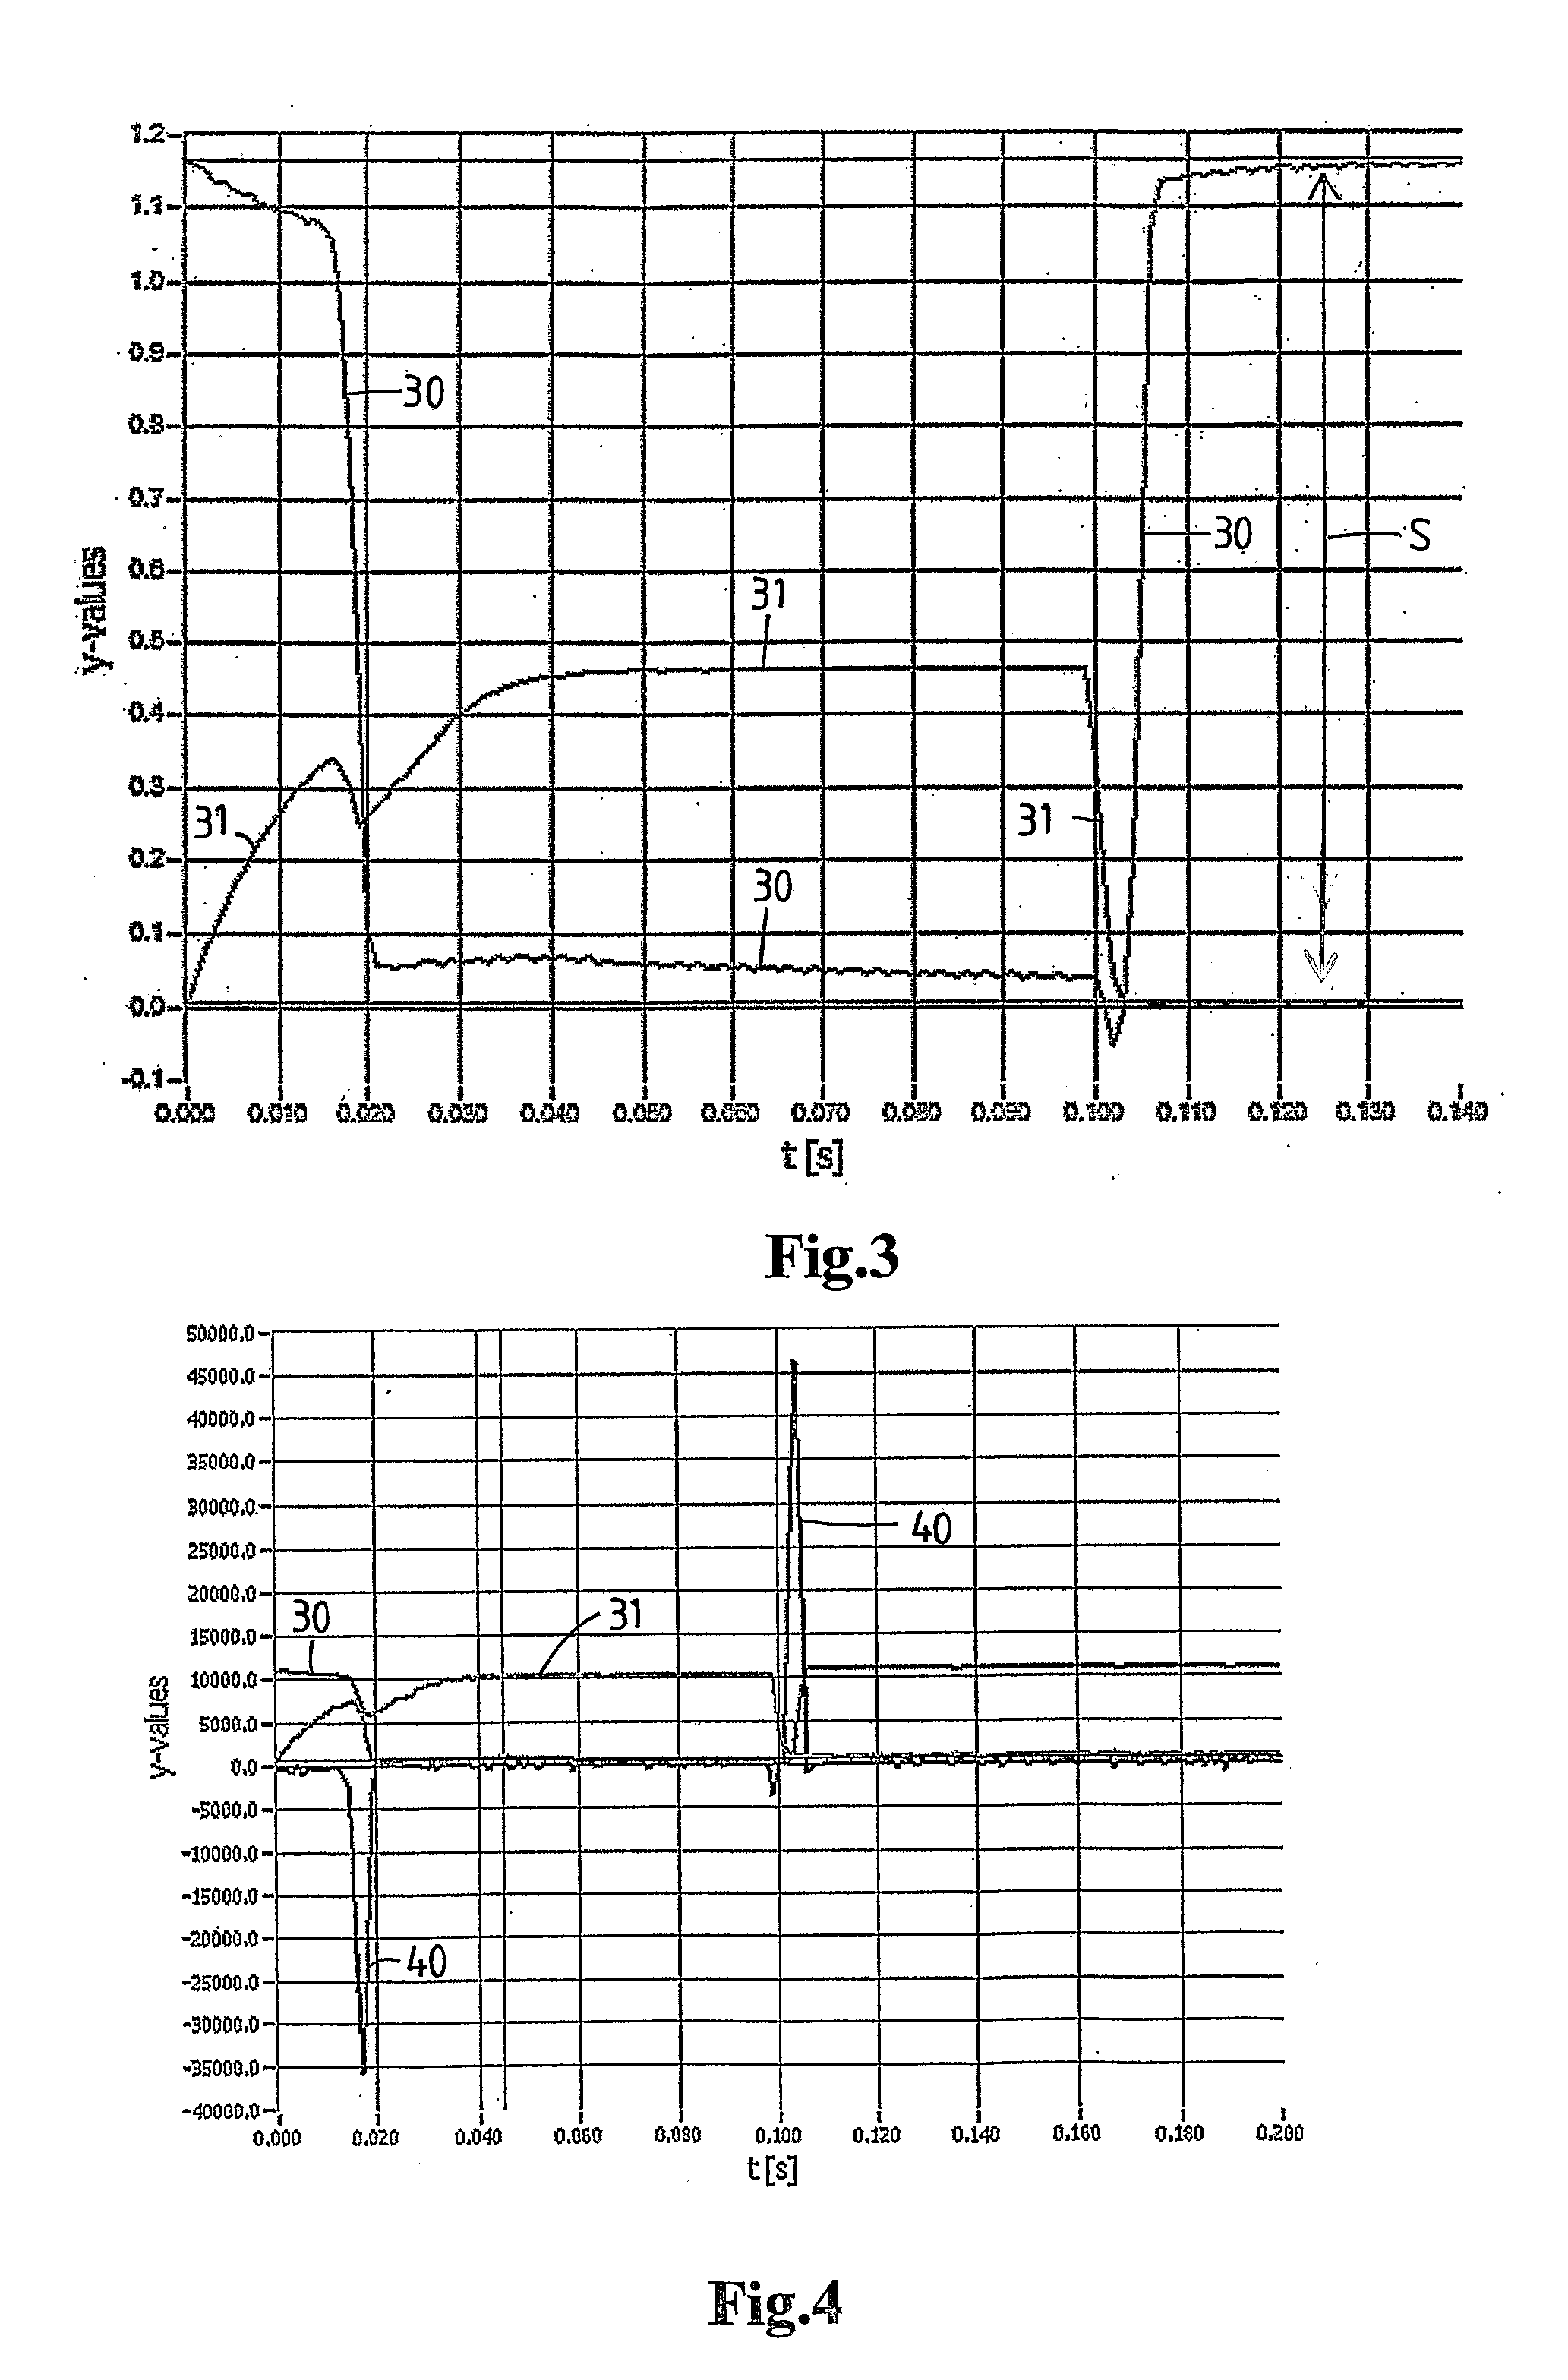 Solenoid Valve With Sensor For Determining Stroke, Velocities And/Or Accelerations Of A Moveable Core Of The Valve As Indication Of Failure Modus And Health Status